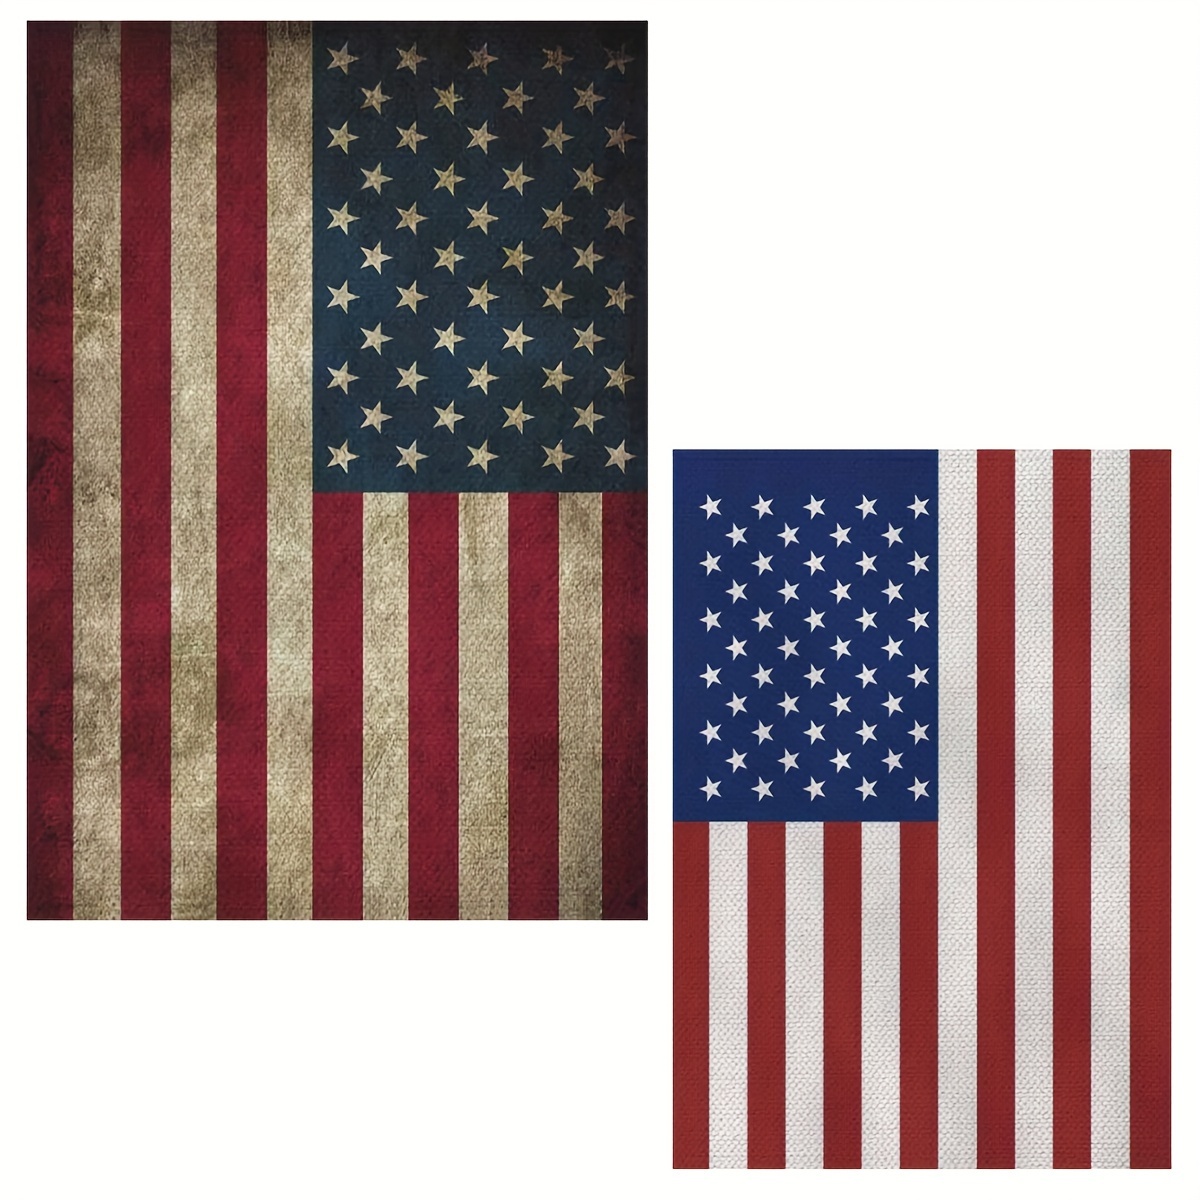 5*3ft American Flag Grommets Usa Polyster Flag Courtyard